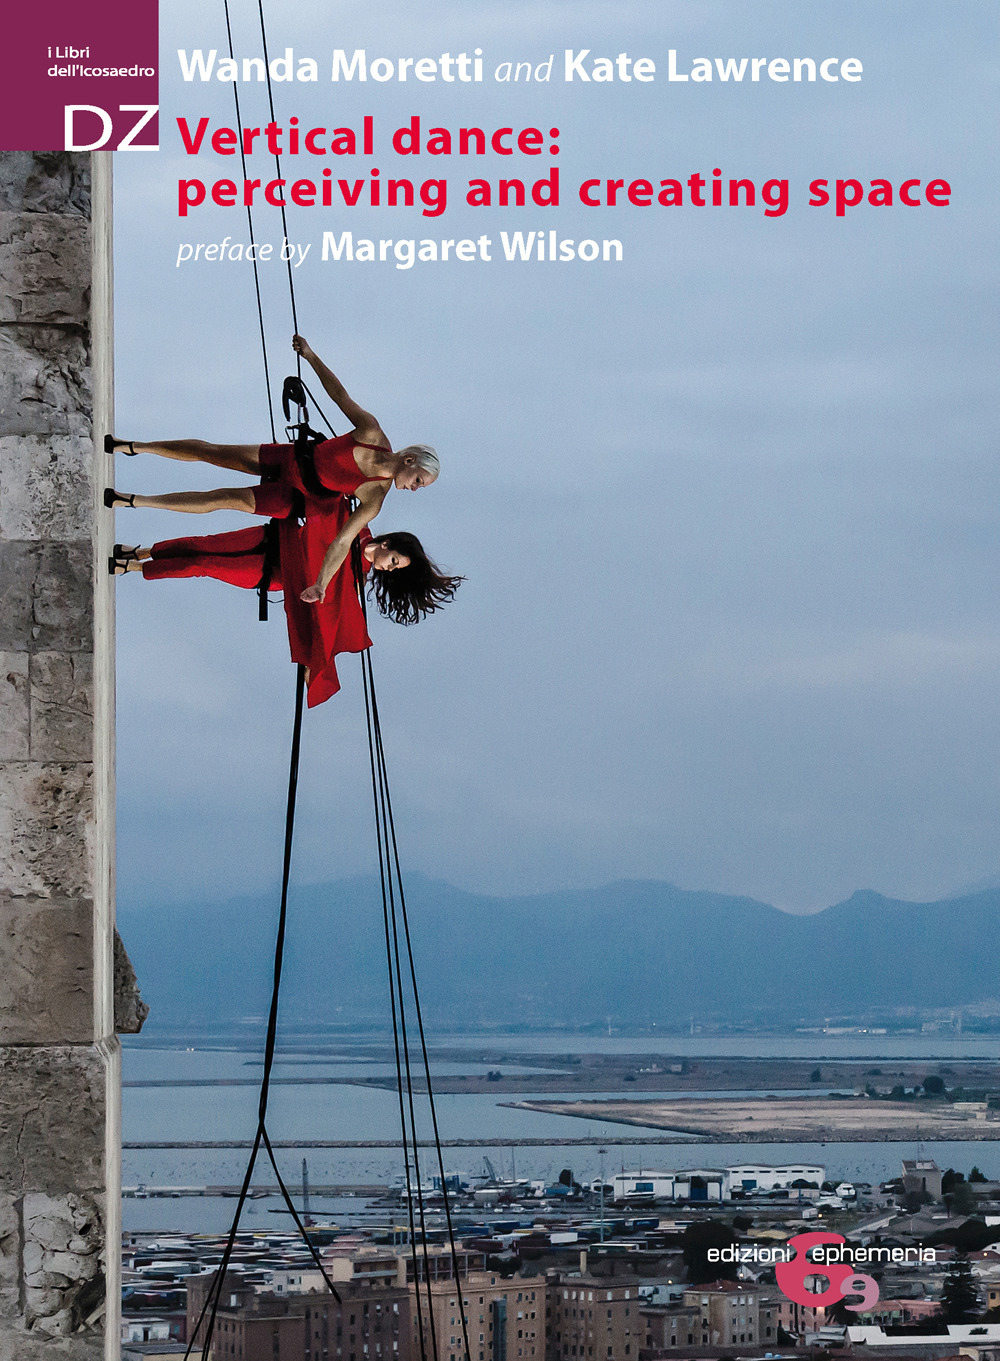 Vertical Dance: perceiving and creating space